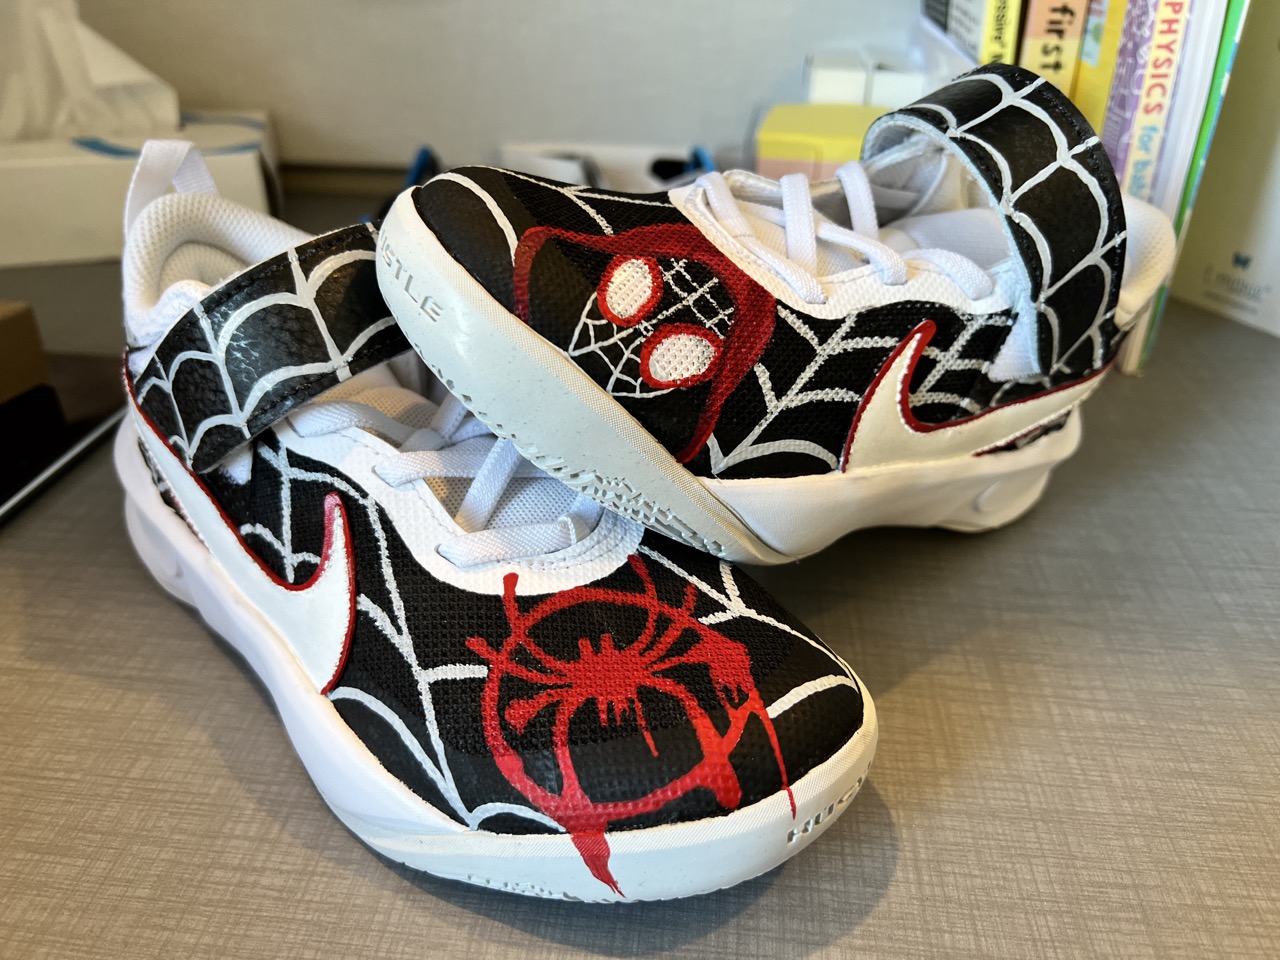 Childrens Tennis Shoes with a Spiderman Logo